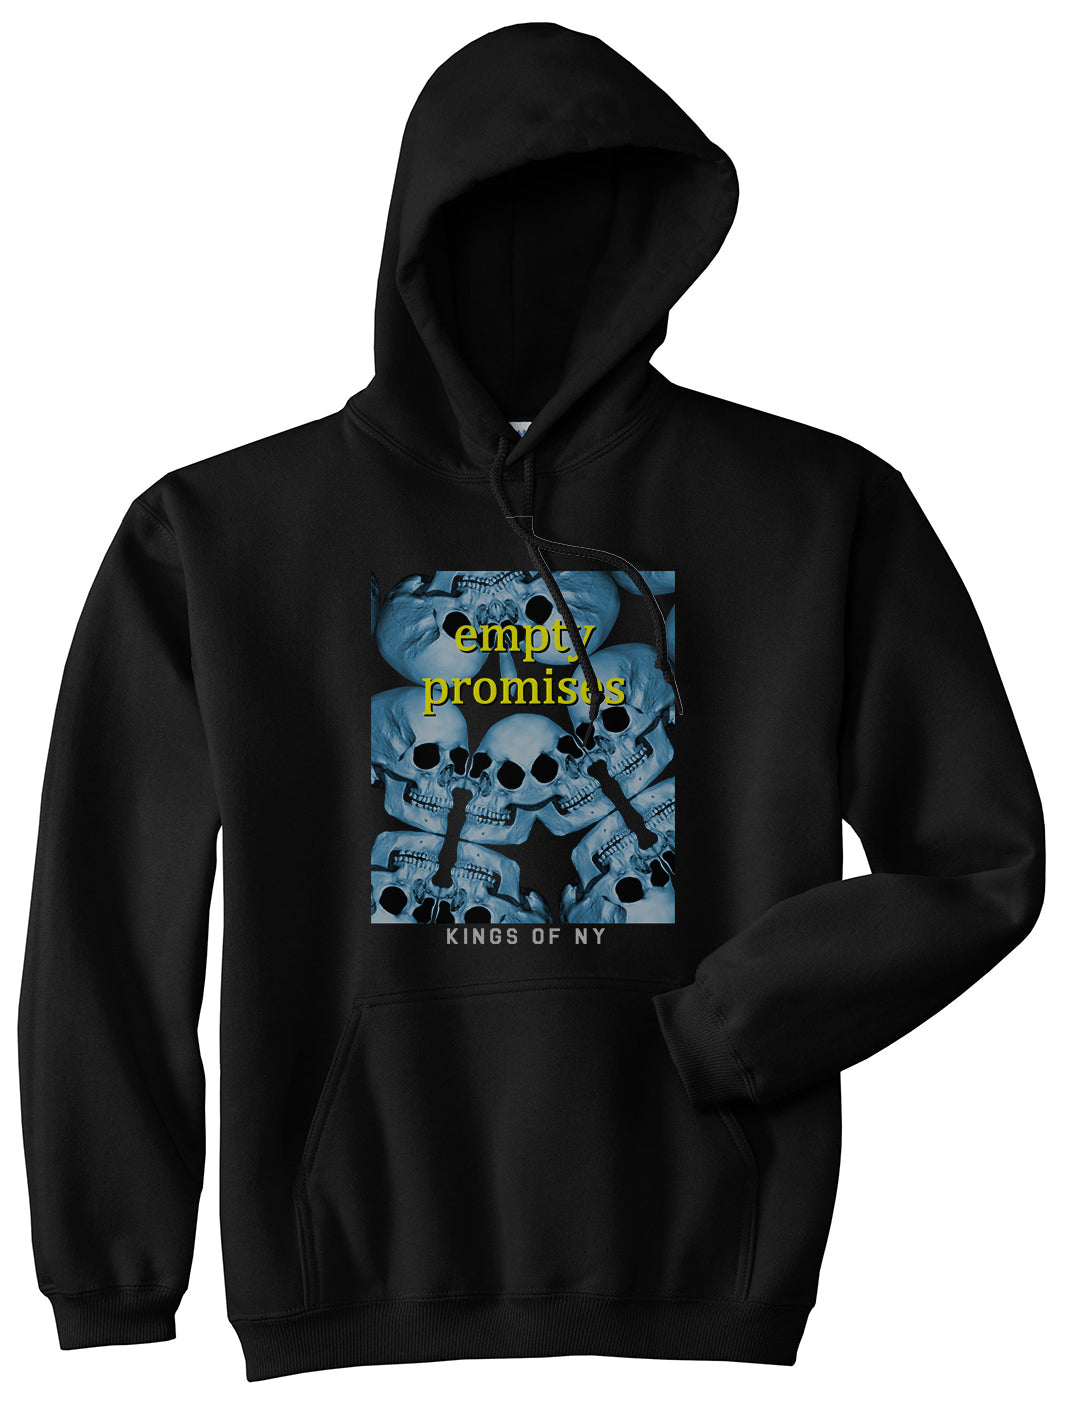 Empty Promises Mens Pullover Hoodie Black by Kings Of NY